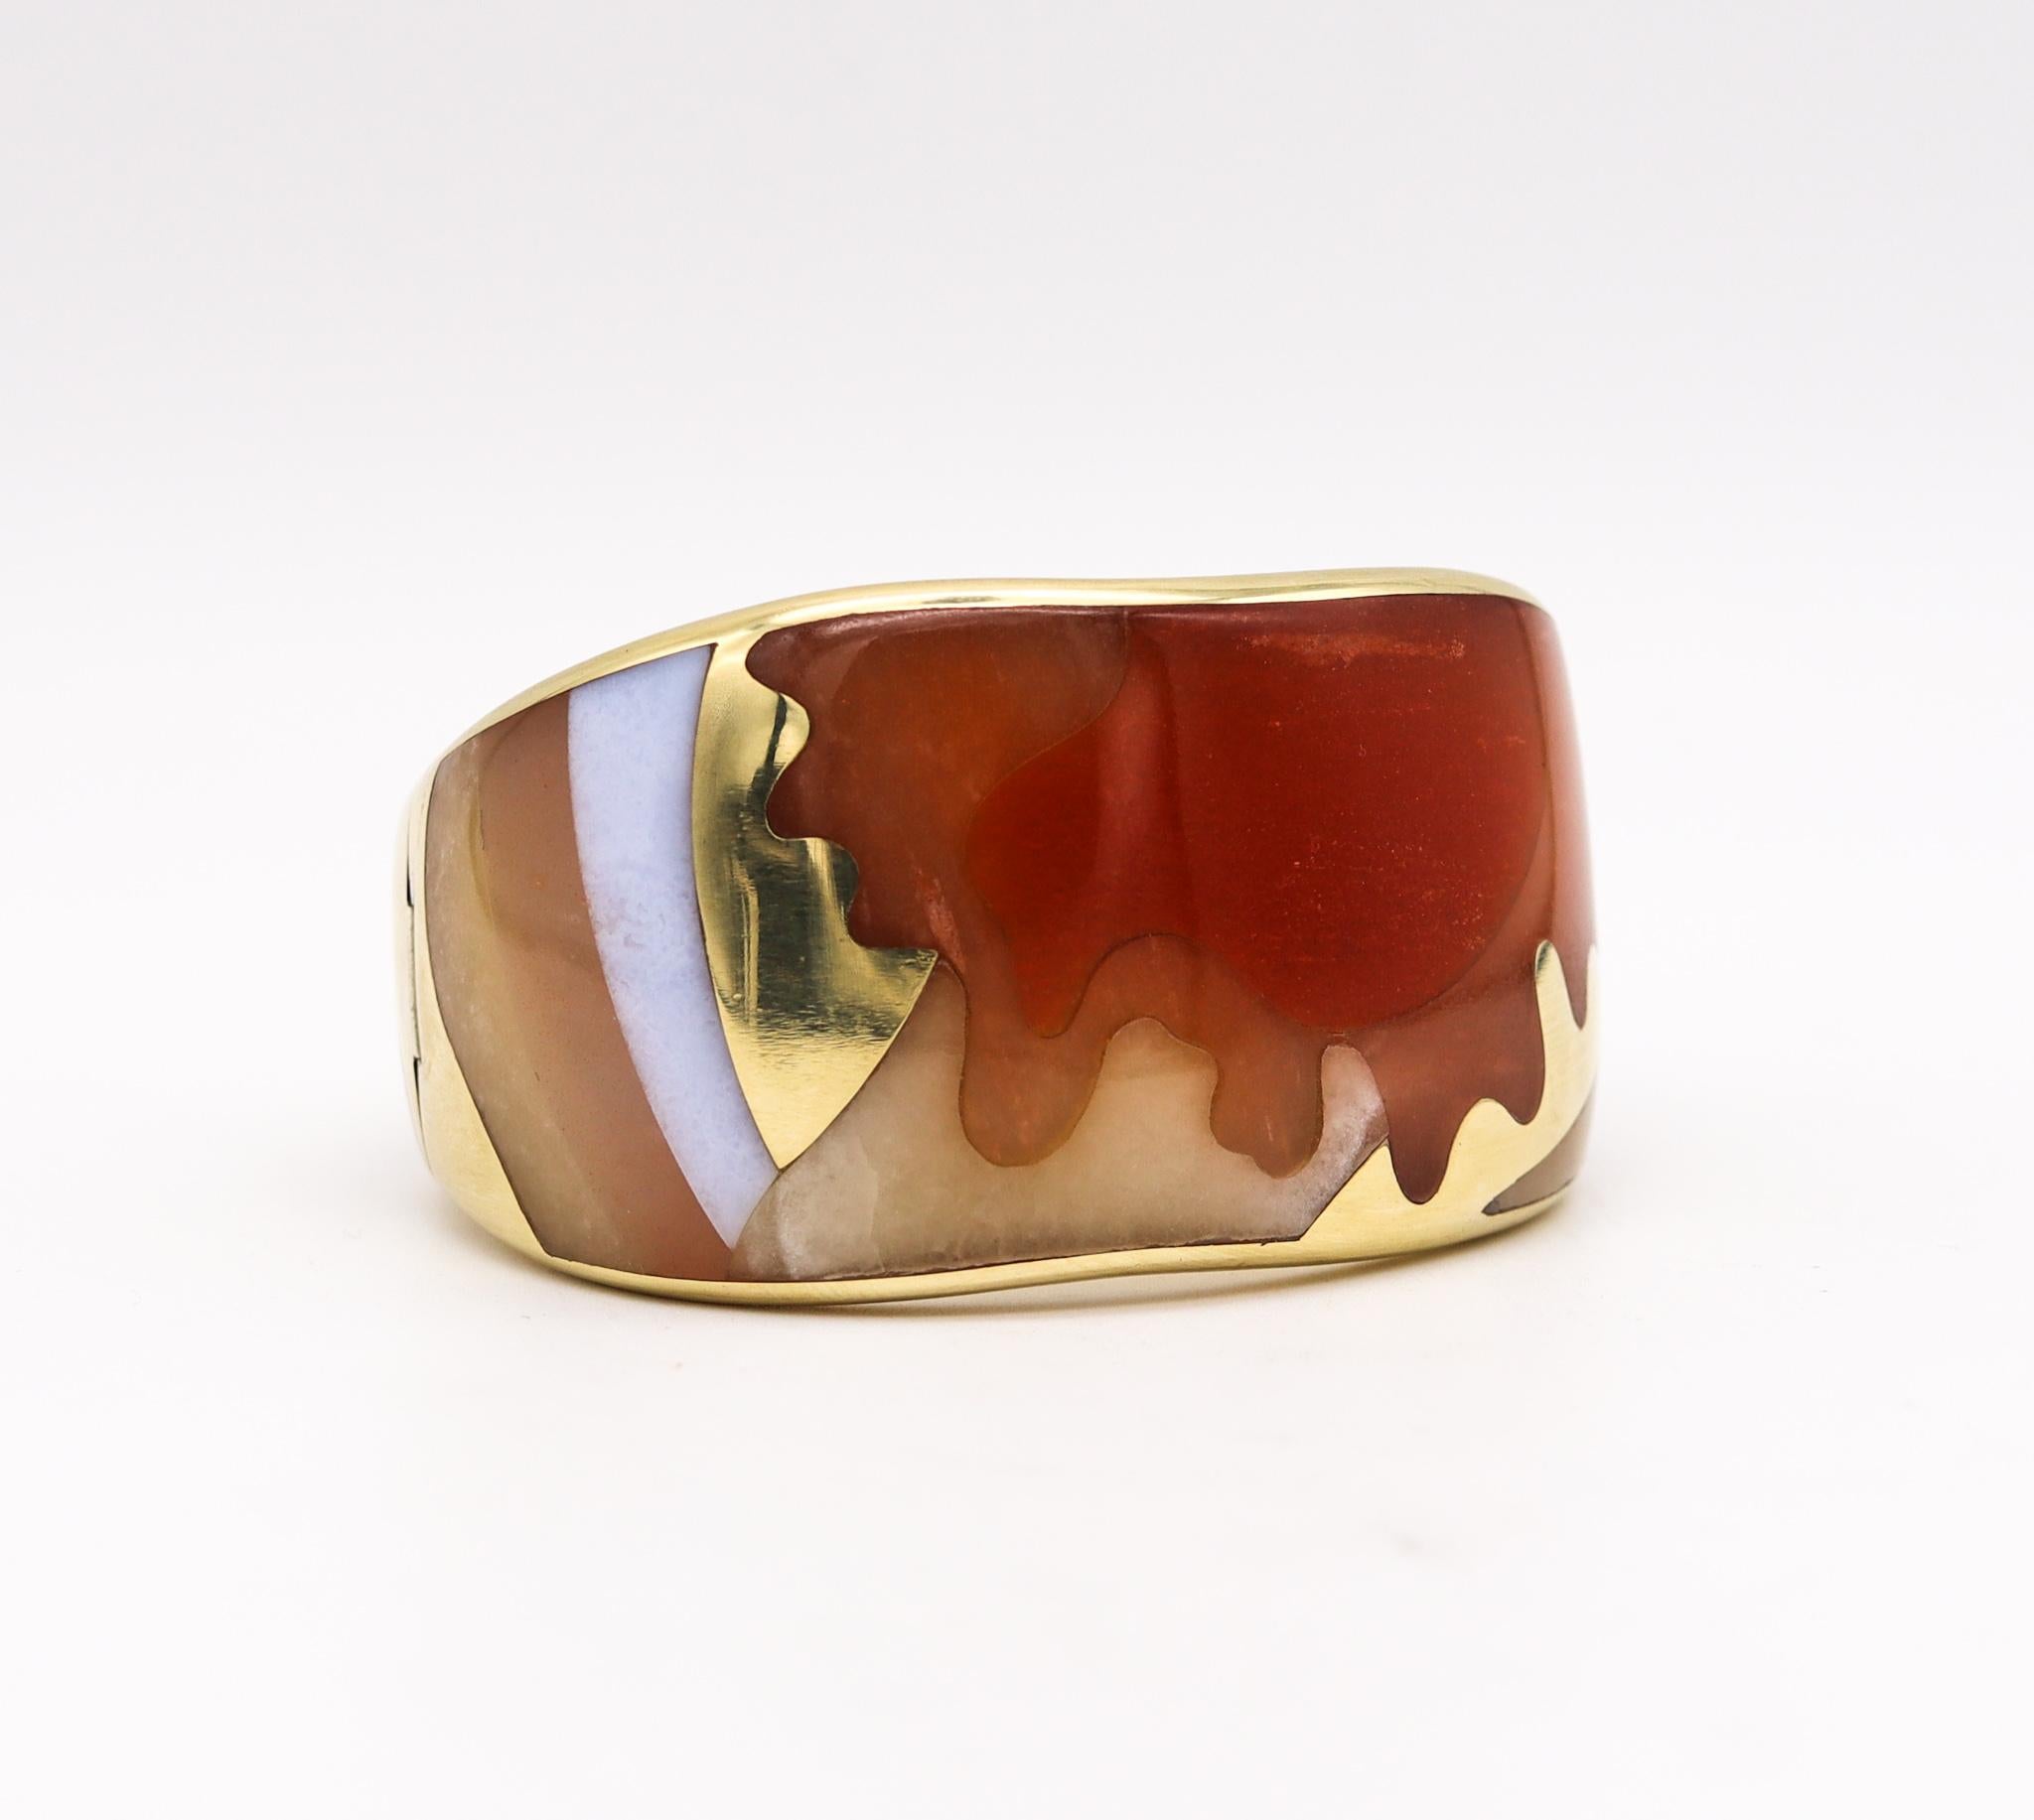 Bangle bracelet designed by Angela Cummings for Tiffany & Co.

An exceptional sculptural piece, created in New York city by the iconic Angela Cummings for the Tiffany Studios, back in the 1977. This colorful bangle bracelet is extremely rare and has